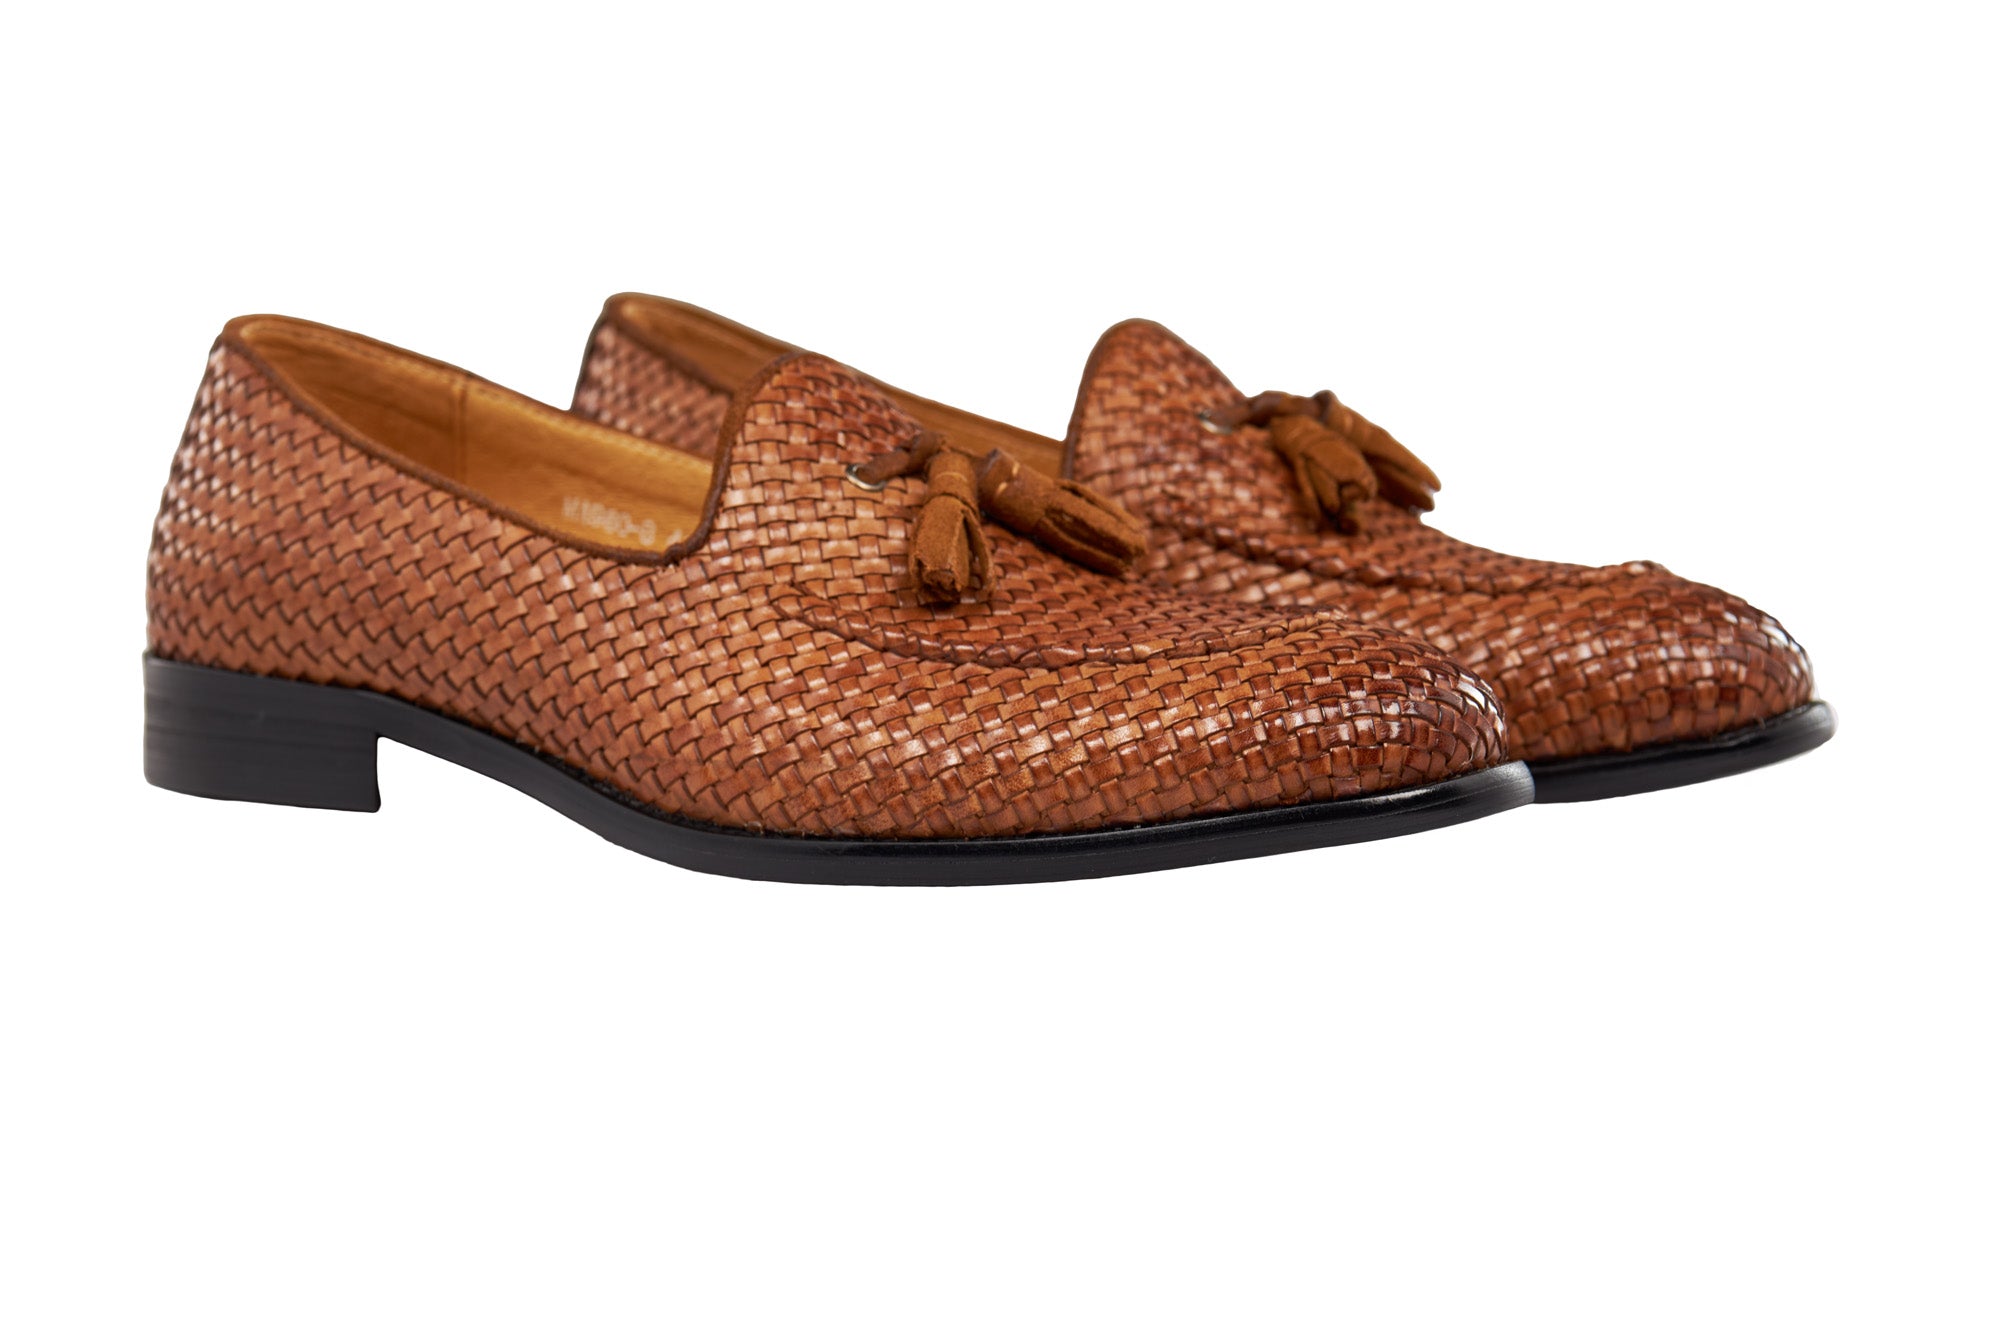 TAN WOVEN LEATHER TASSEL LOAFER